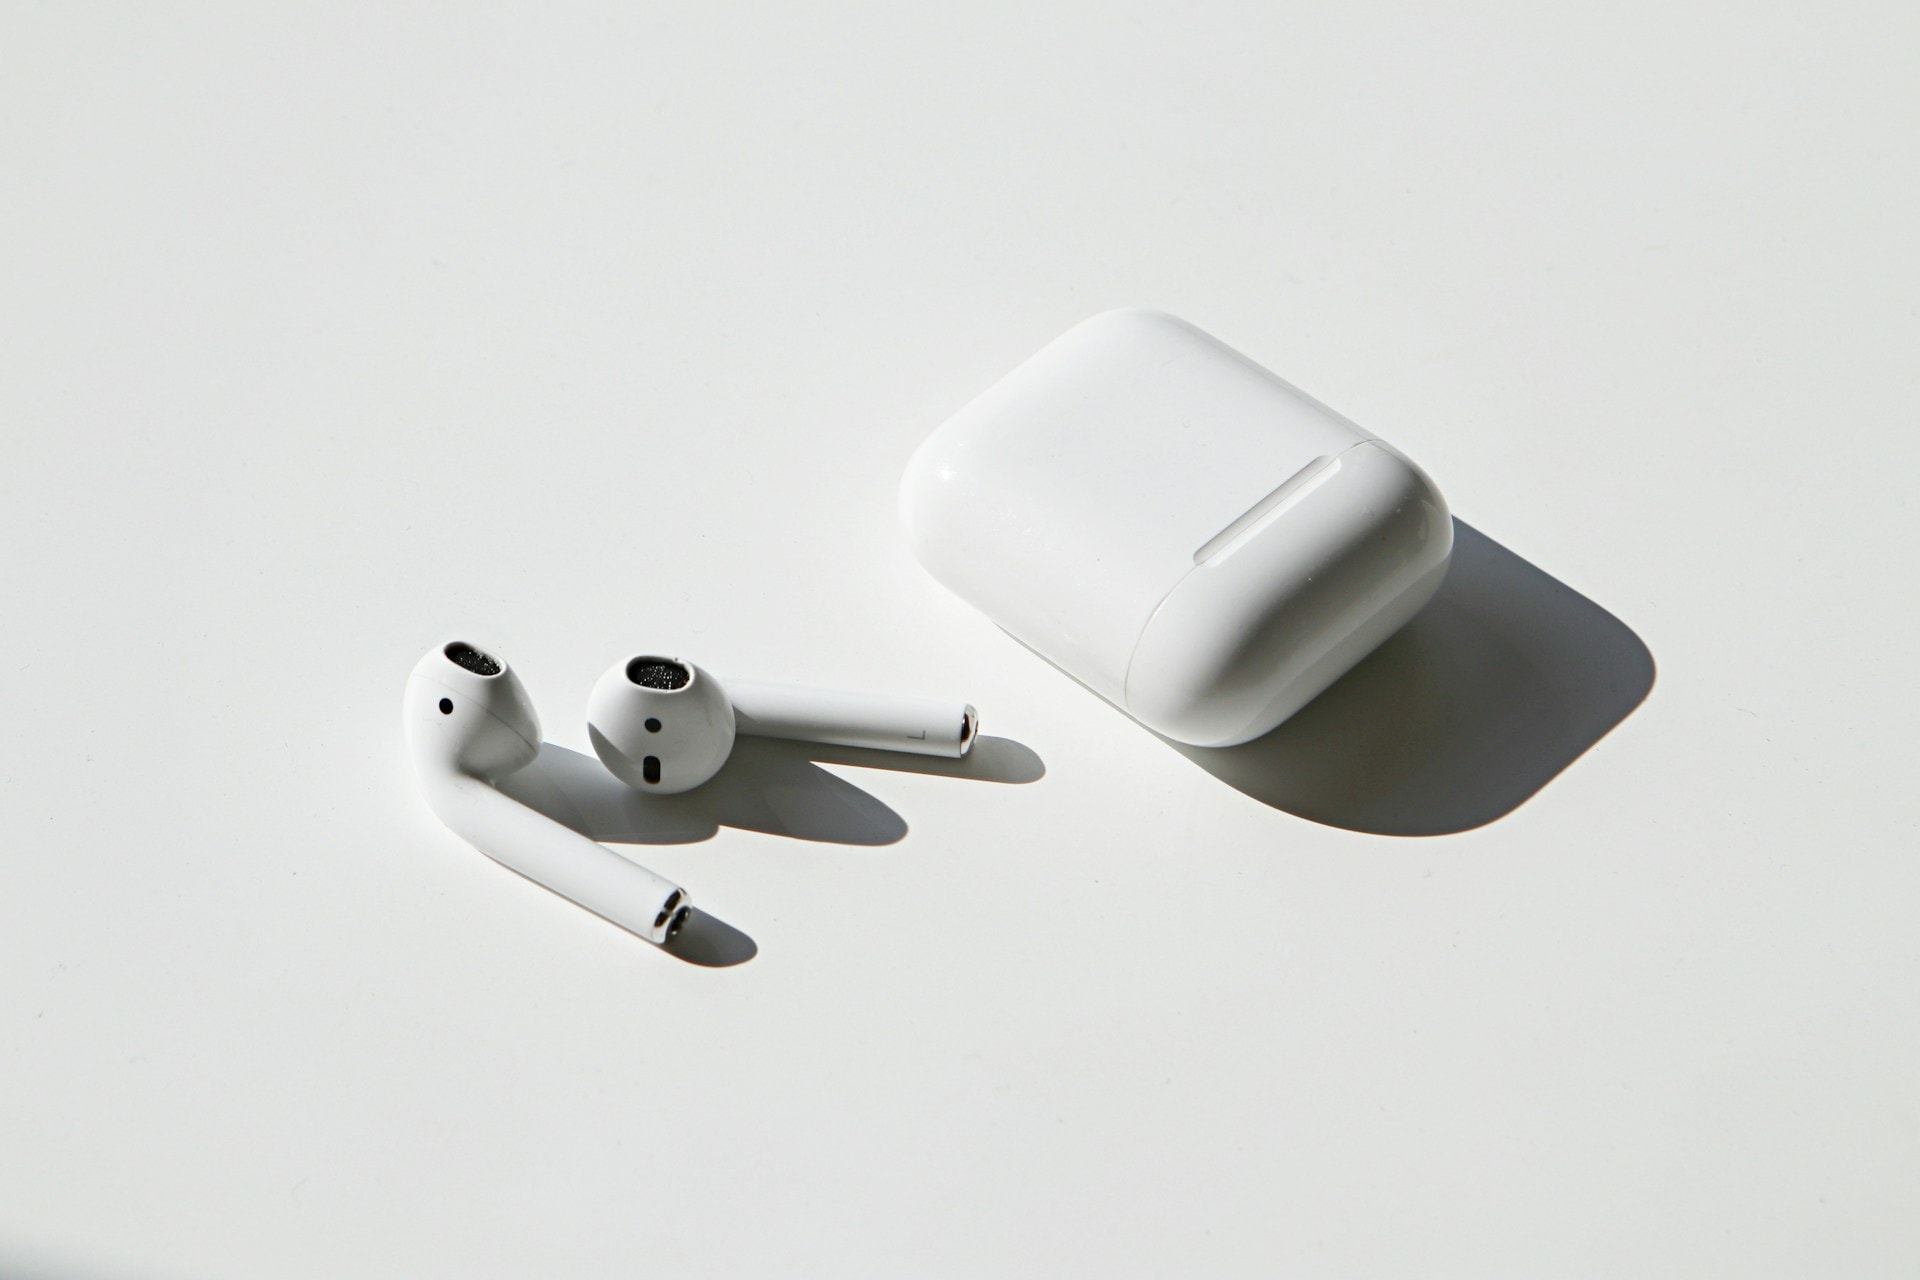 New Apple AirPods Max and Cheaper AirPods Are Anticipated to Release Later This Year